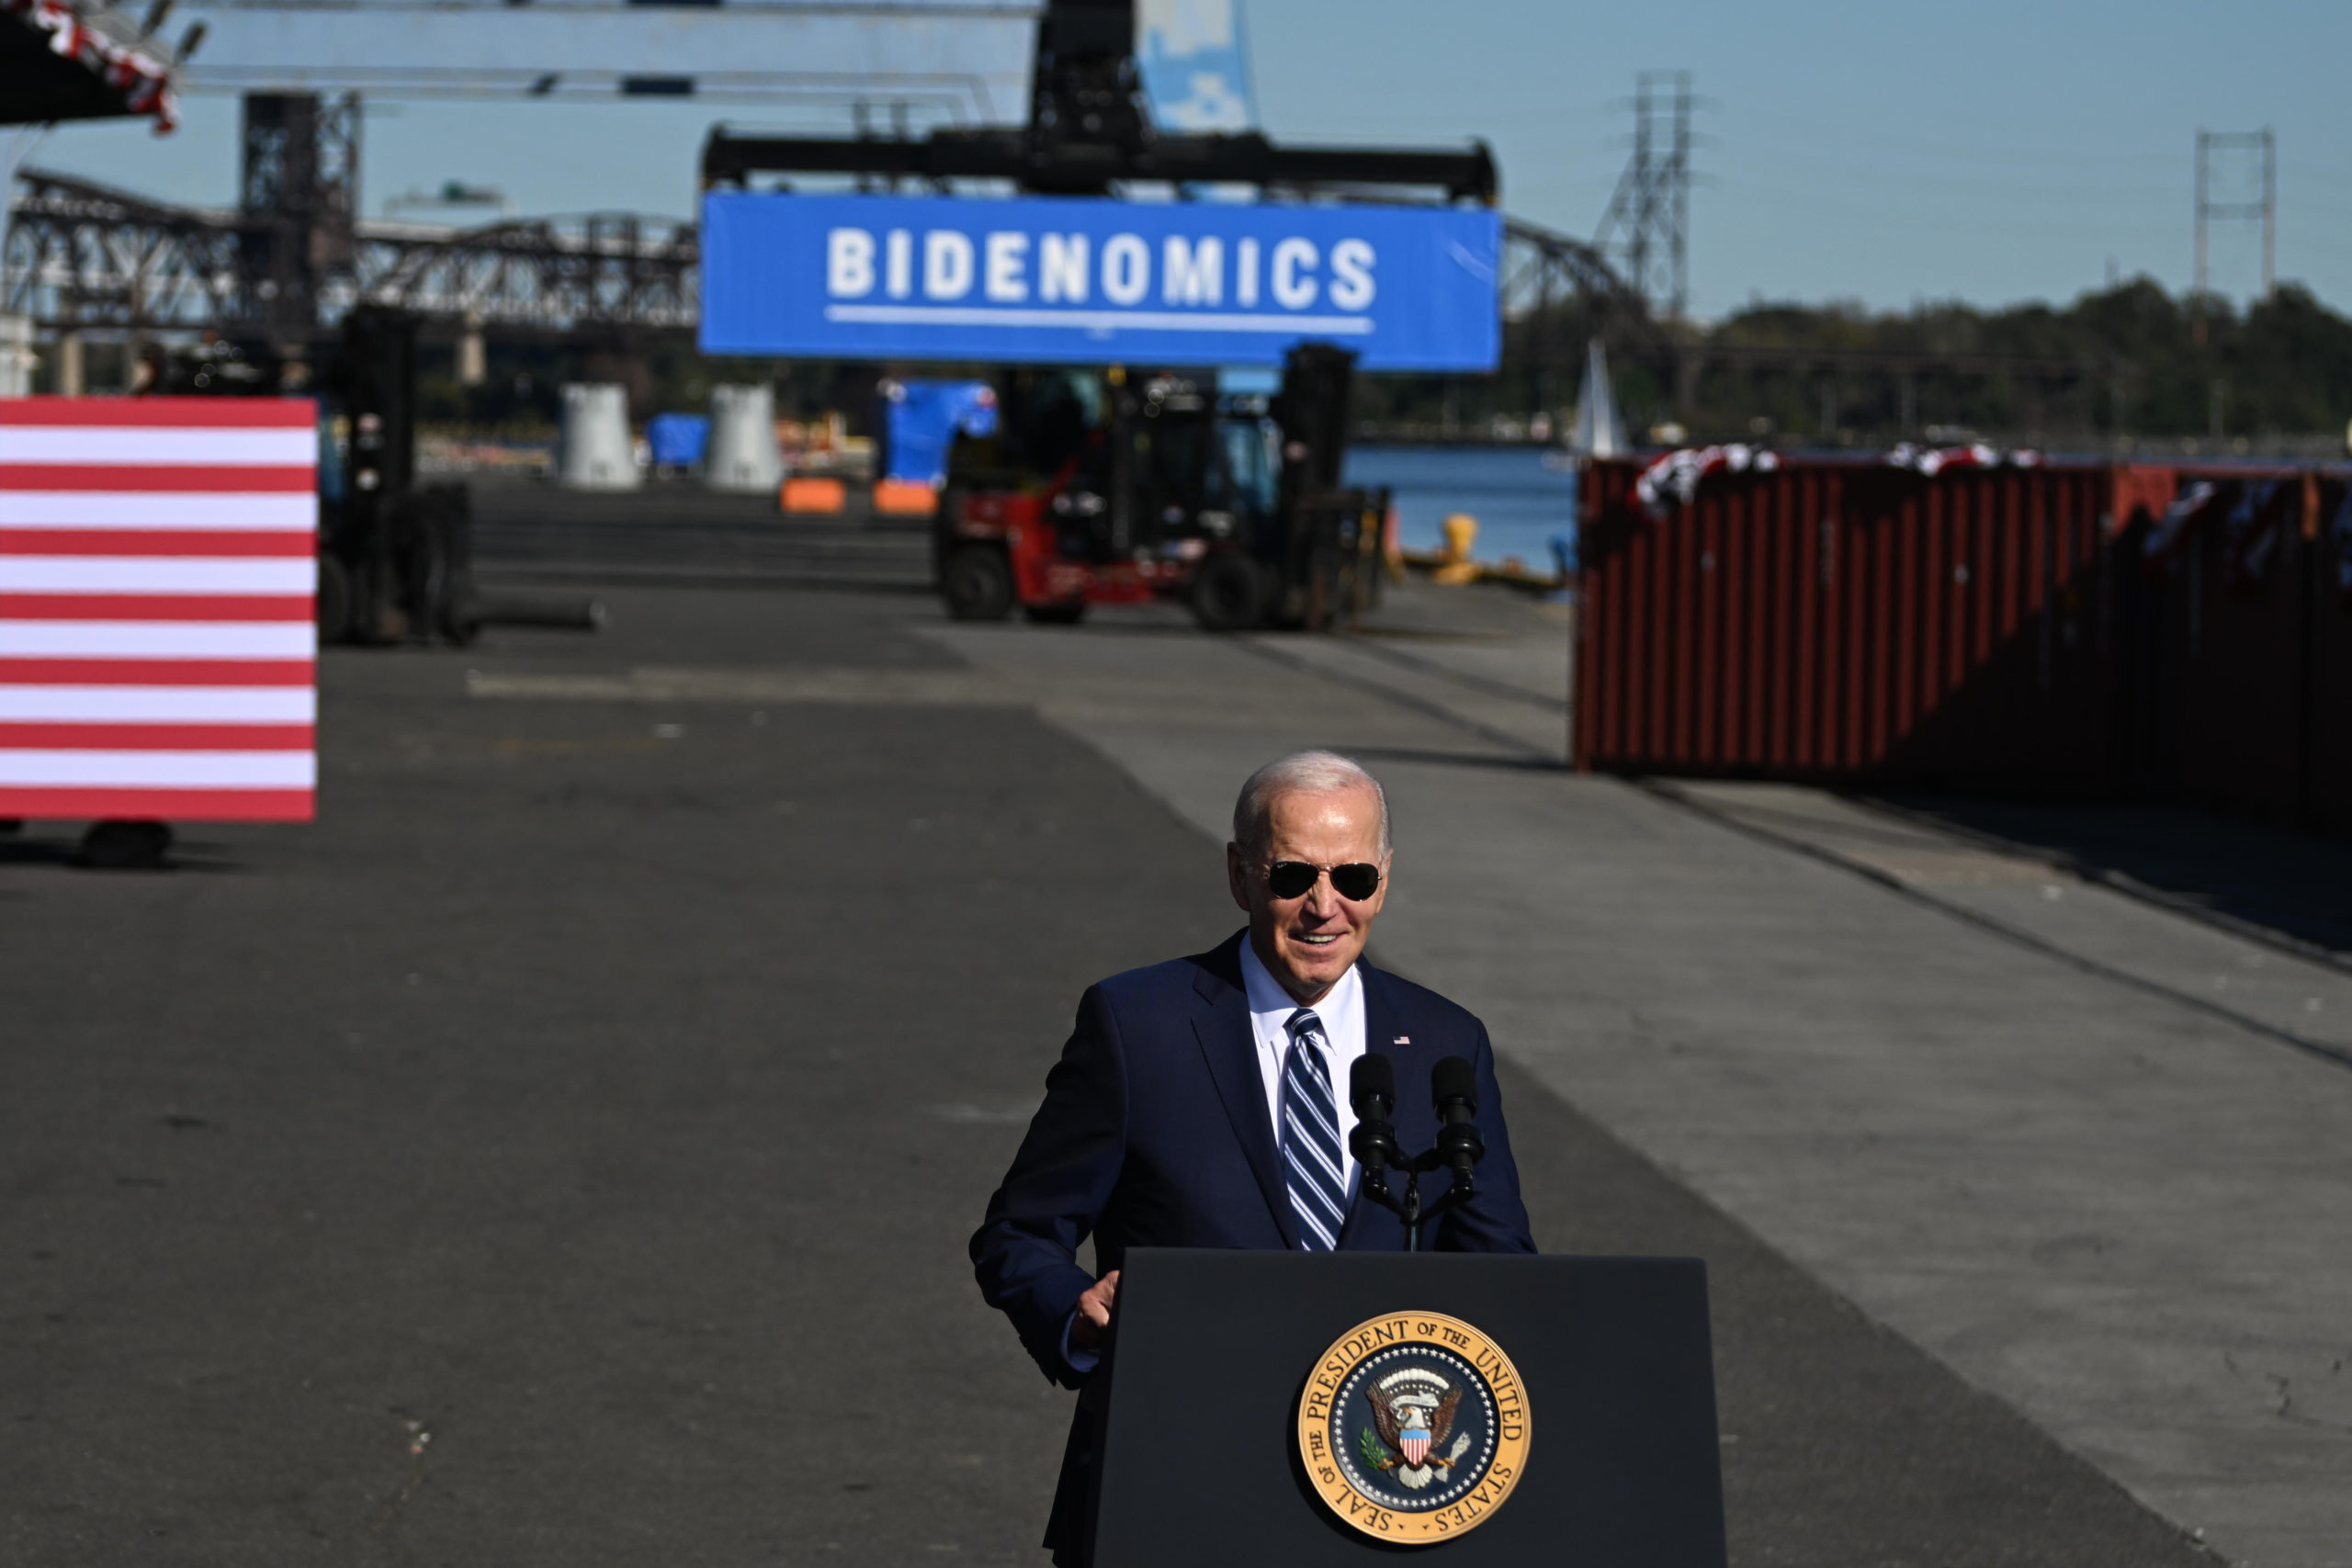 PHILADELPHIA, PENNSYLVANIA - OCTOBER 13: U.S. President Joe Biden speaks at Tioga Marine Terminal on October 13, 2023 in Philadelphia, Pennsylvania. Biden discussed how his Bidenomics agenda is creating good-paying union jobs, investing in infrastructure, accelerating the transition to a clean energy future, and combatting the climate crisis.(Photo by Mark Makela/Getty Images)